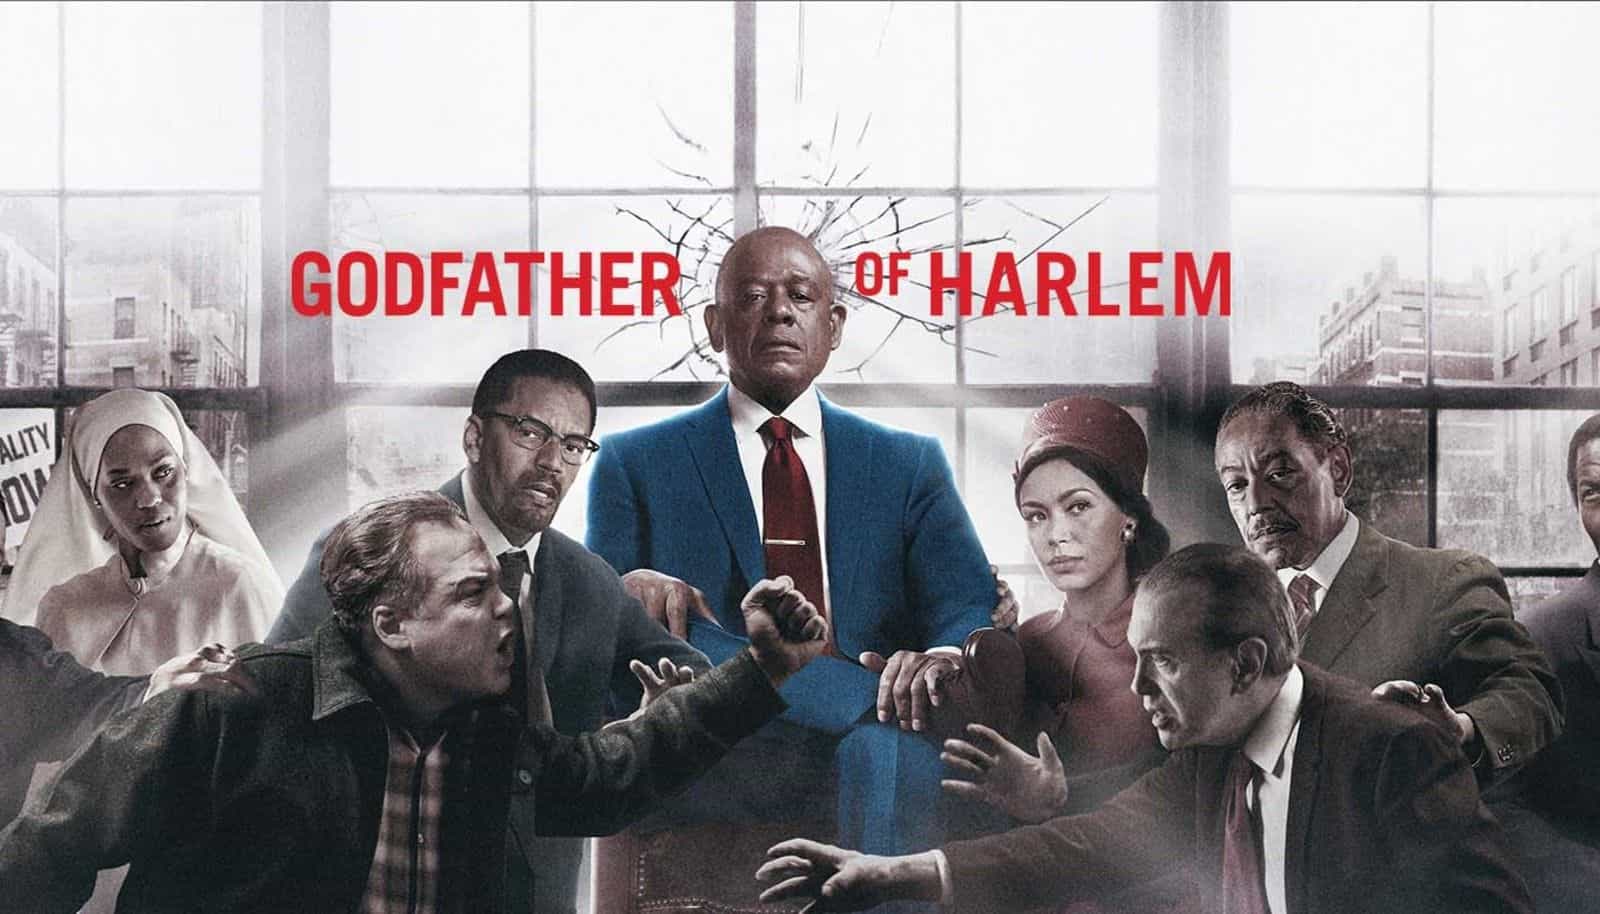 Godfather Of Harlem Season 3 Episode 3: Release Date & Streaming Guide